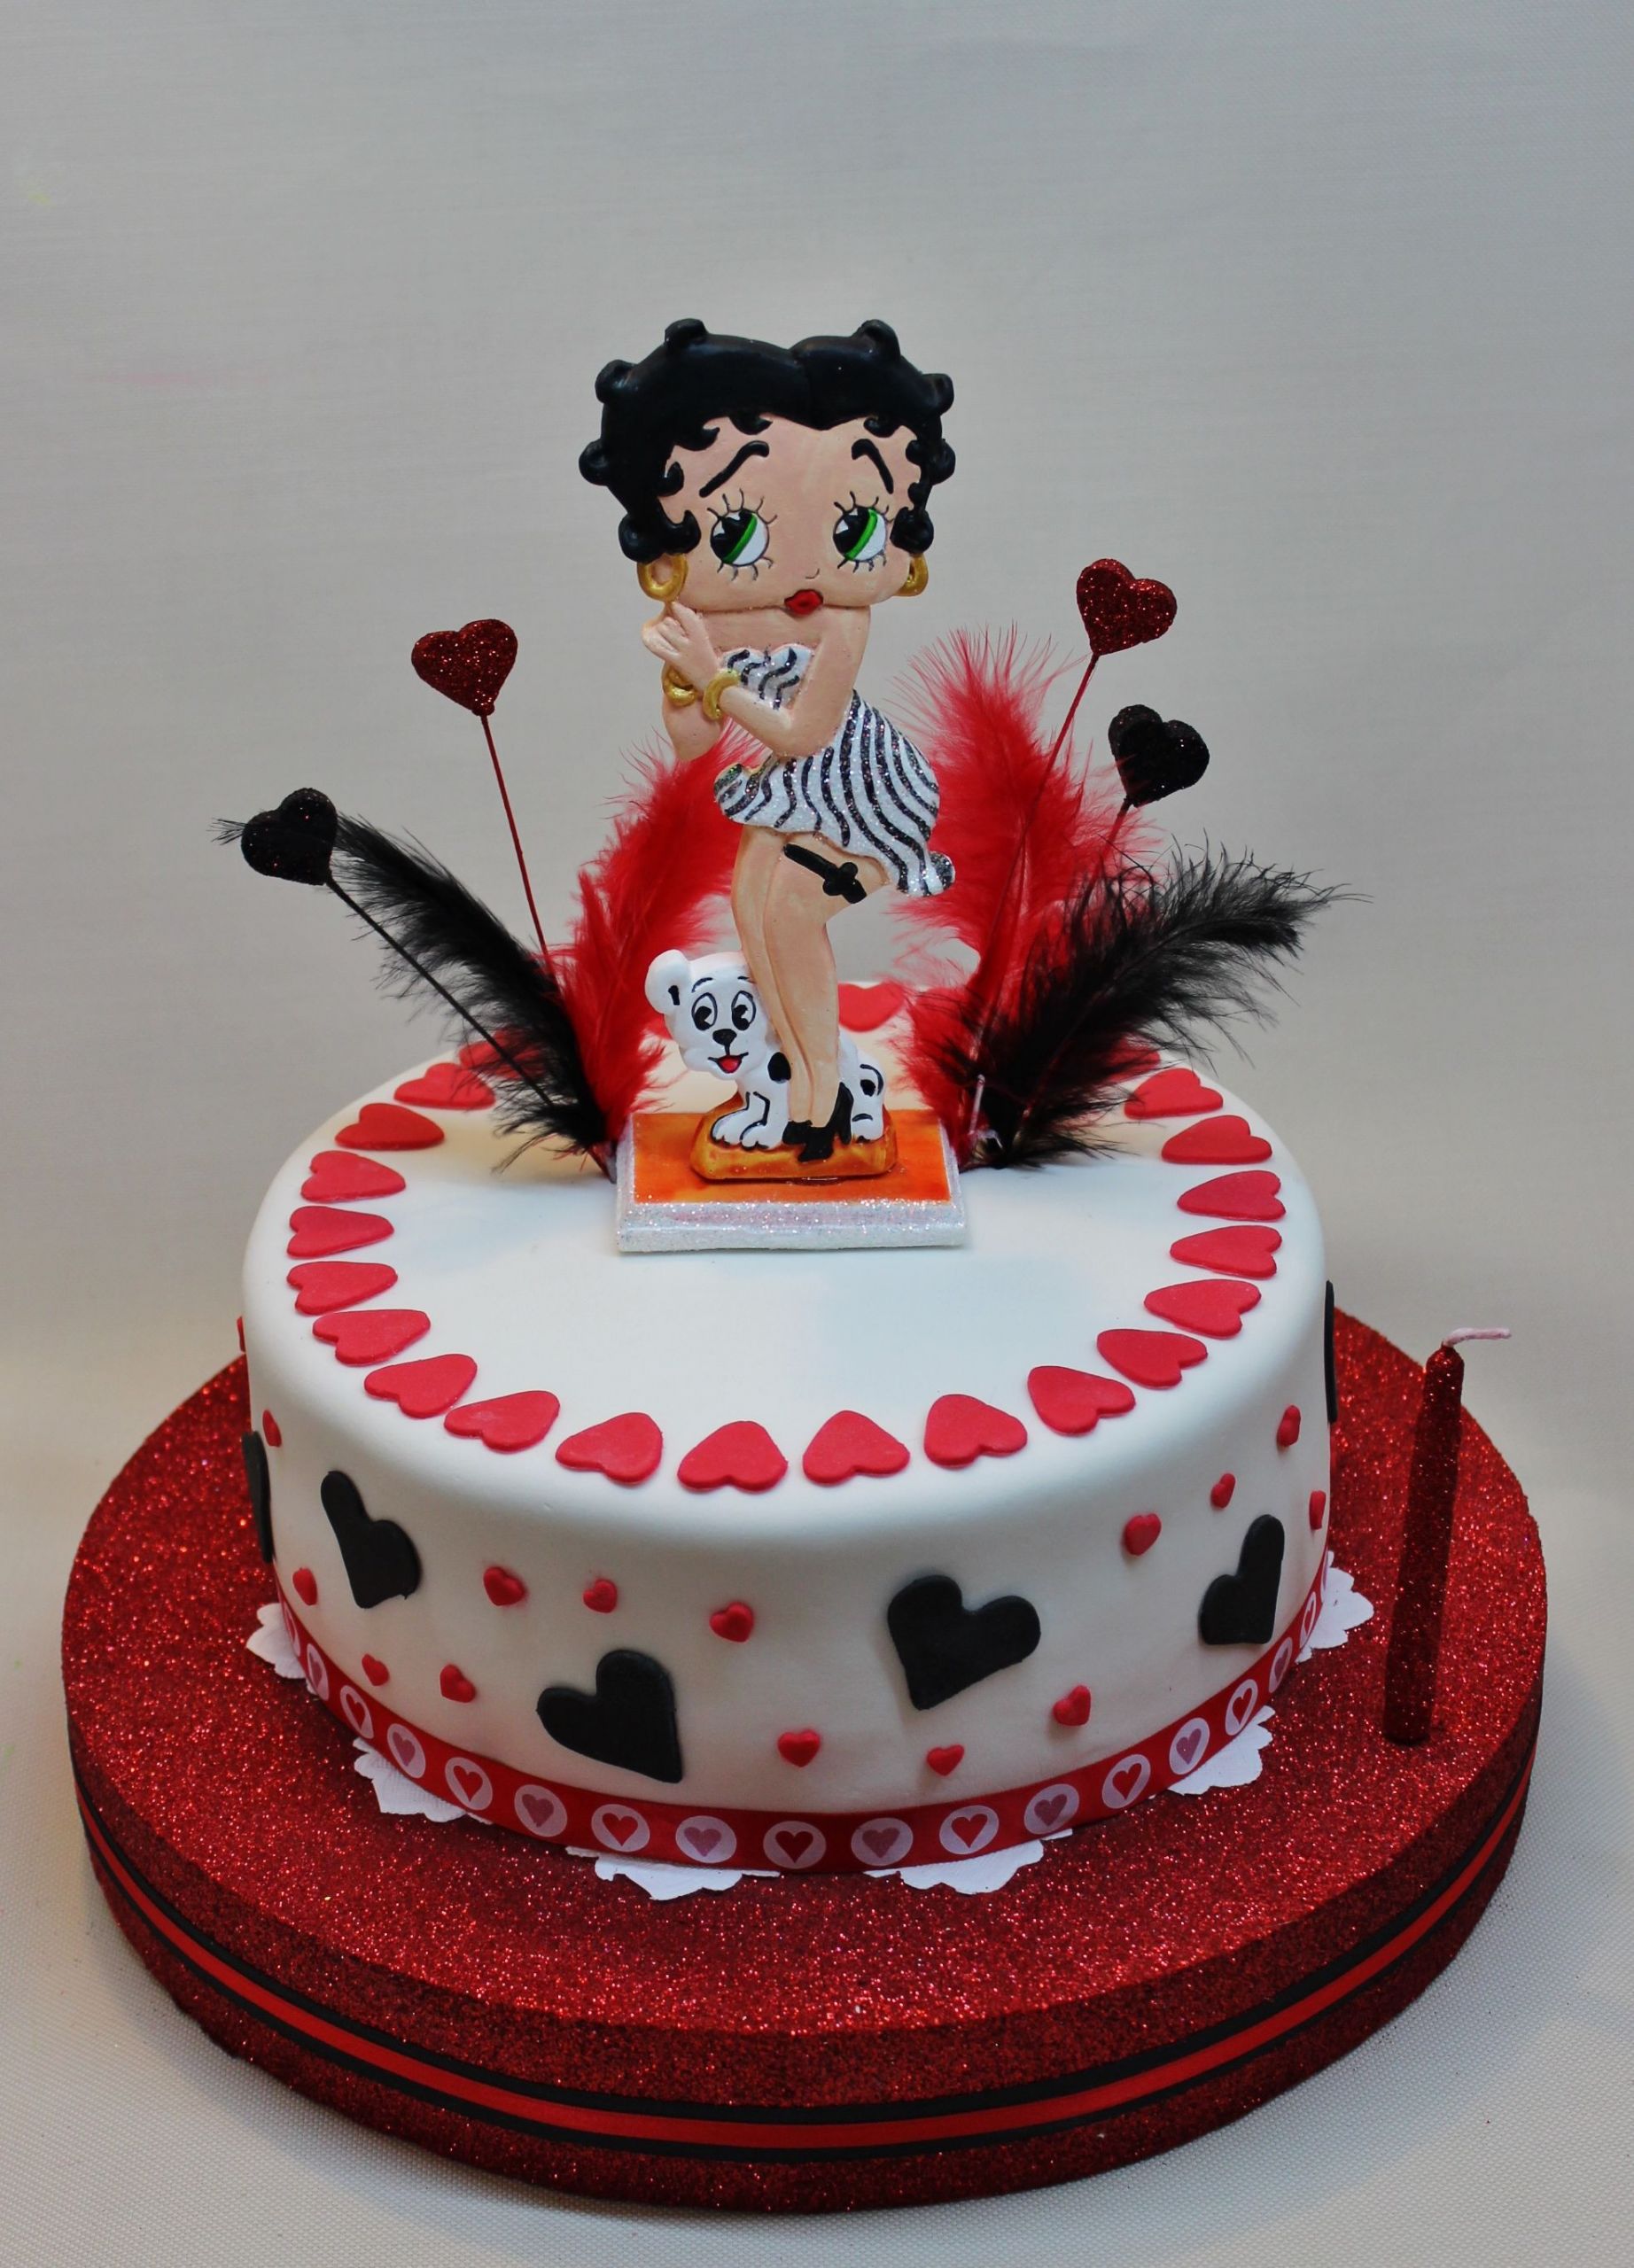 Betty Boop Birthday Cakes
 Betty Boop Cake by Violeta Glace